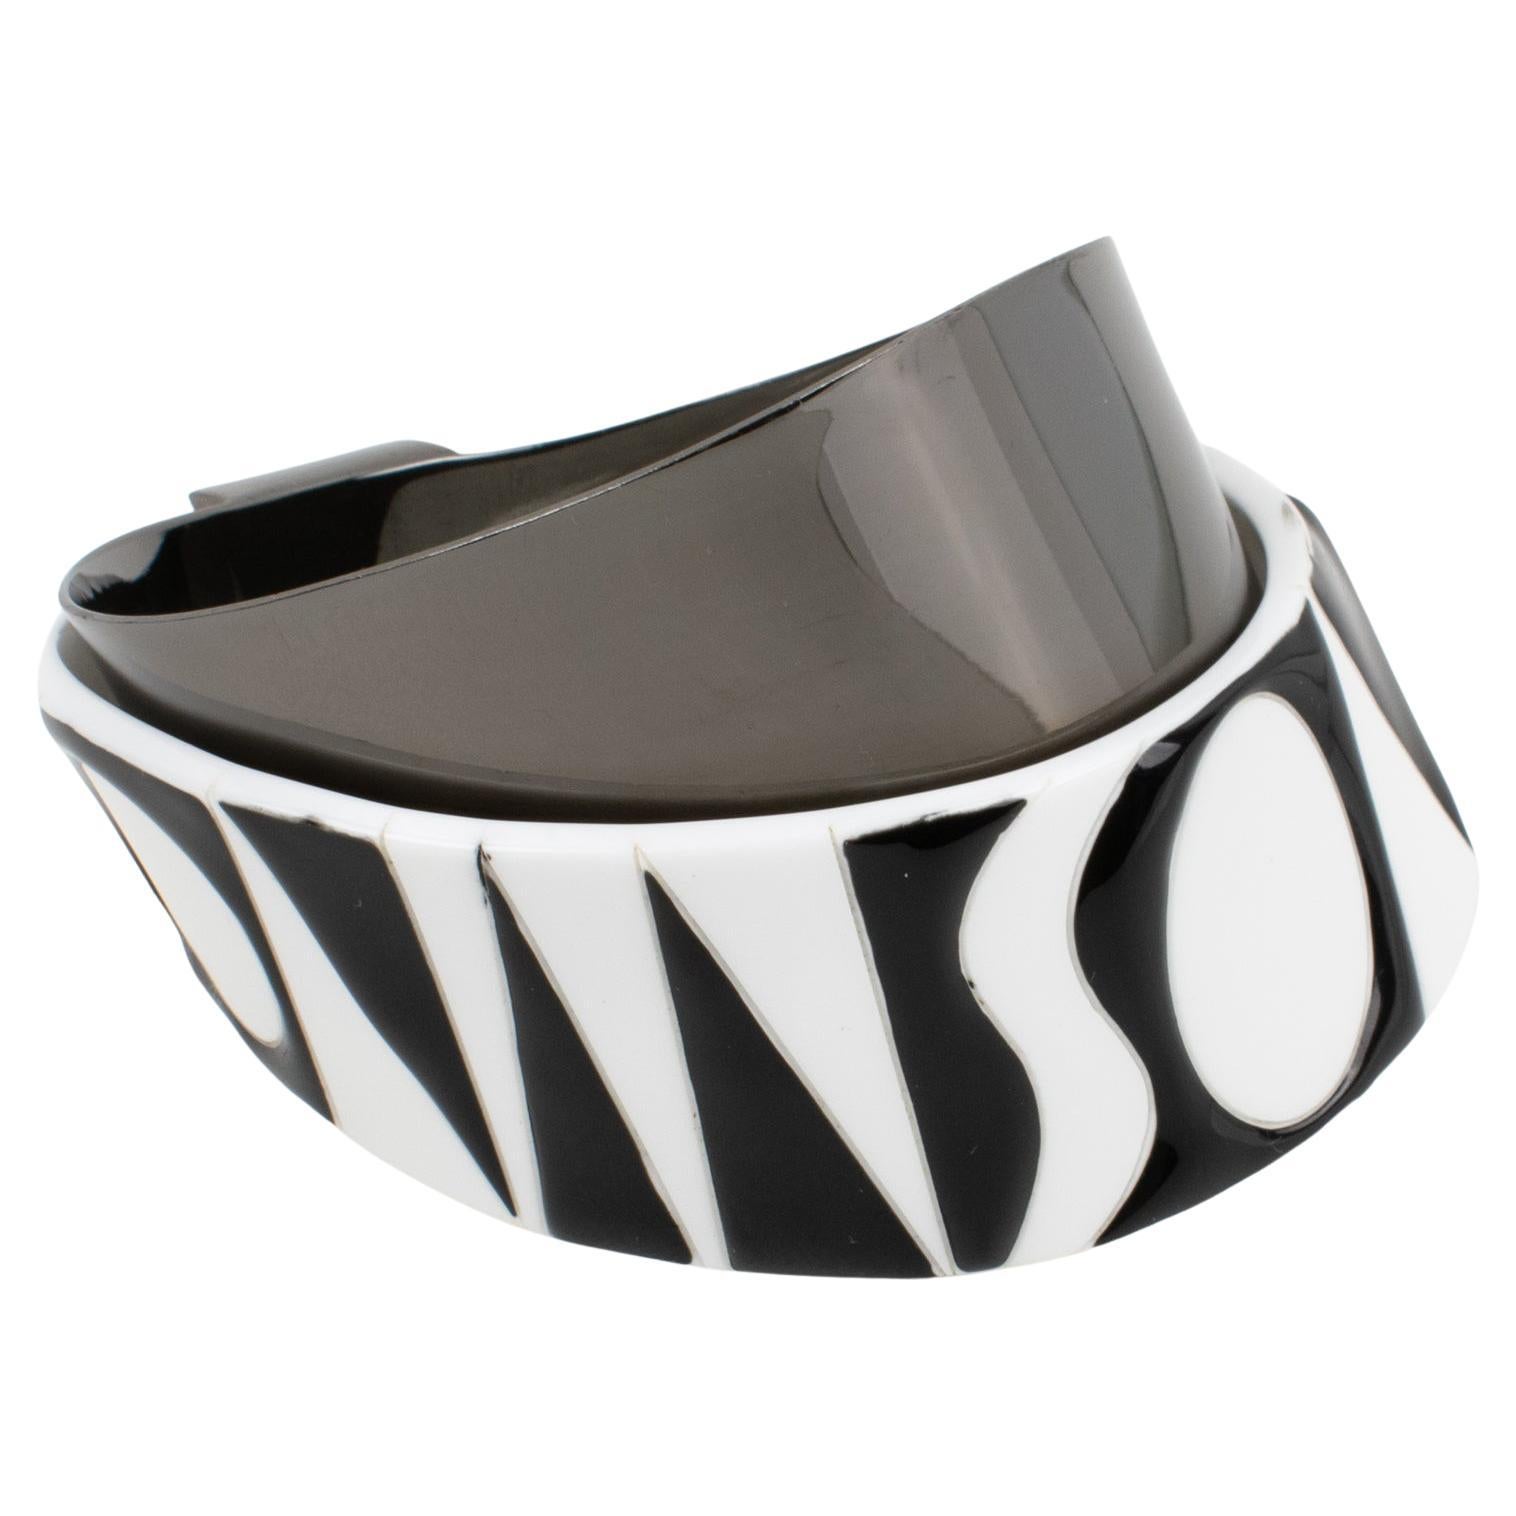 Missoni Black and White Lucite and Metal Bracelet Bangle, Runway Spring 2014 For Sale